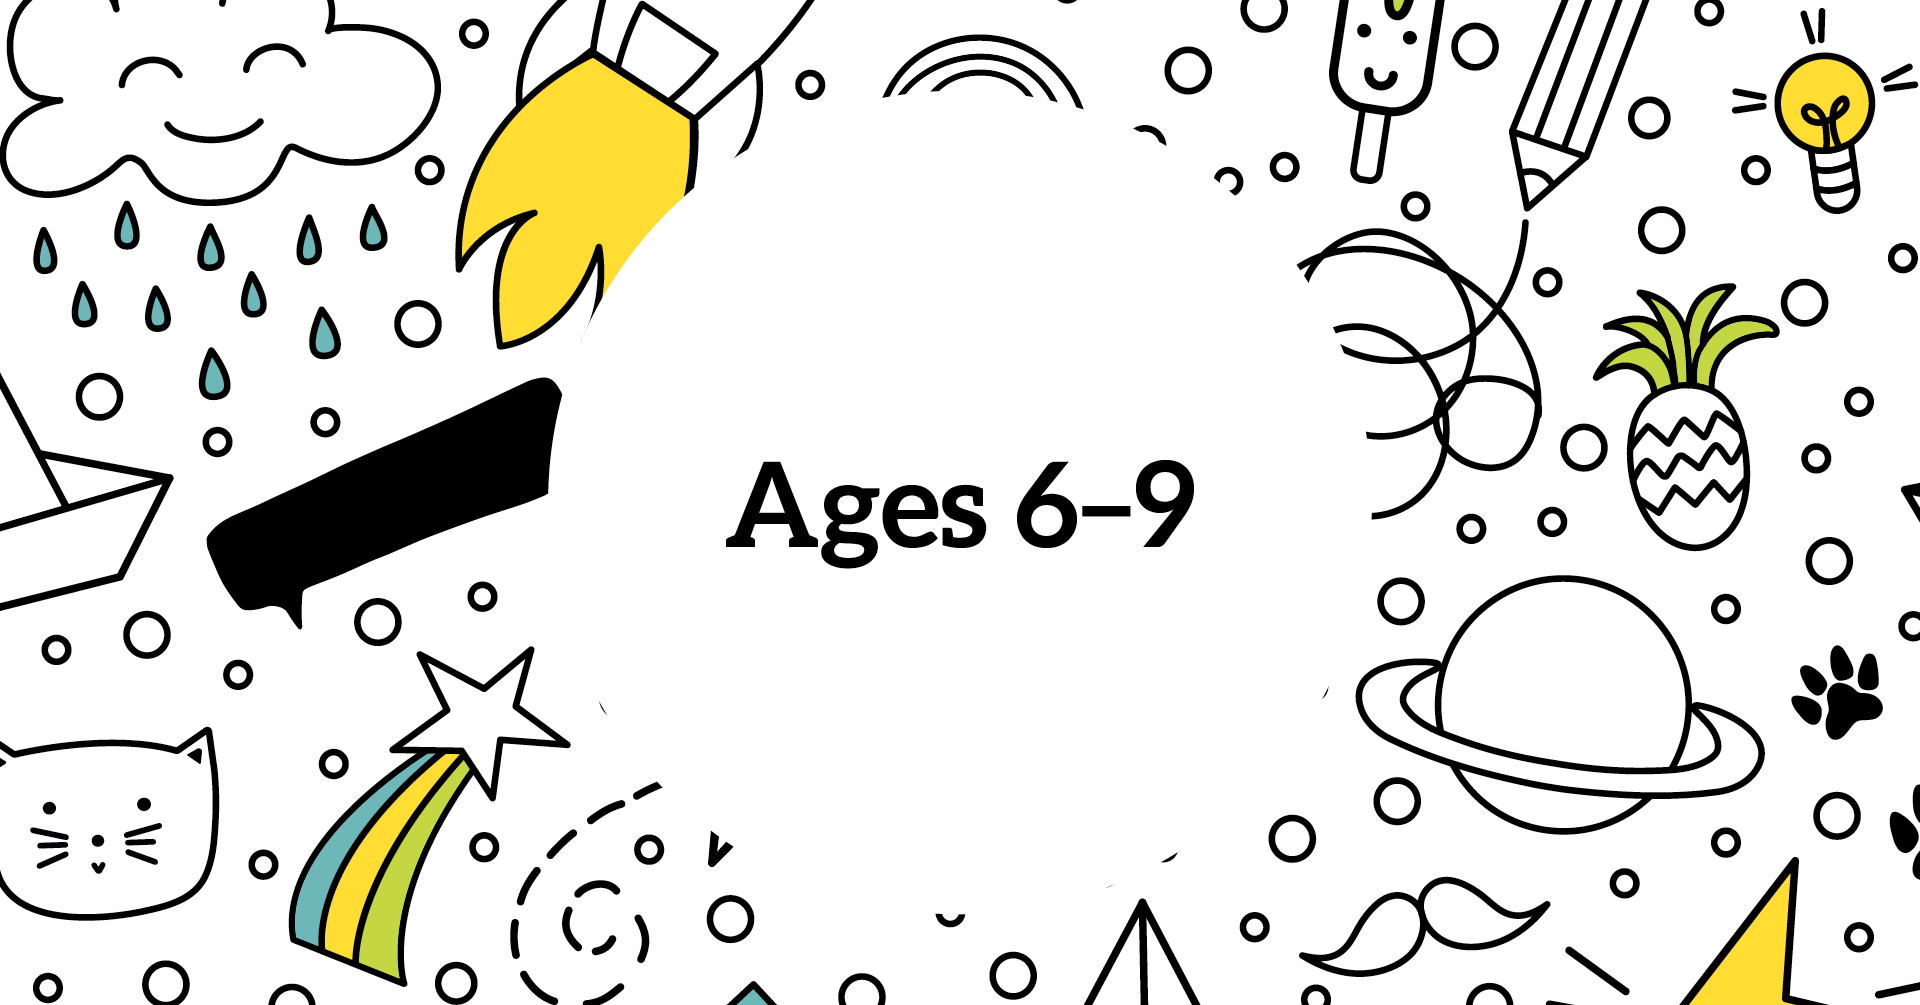 Ages 6-9 cartoon images of space ship, rain, rainbows, and more